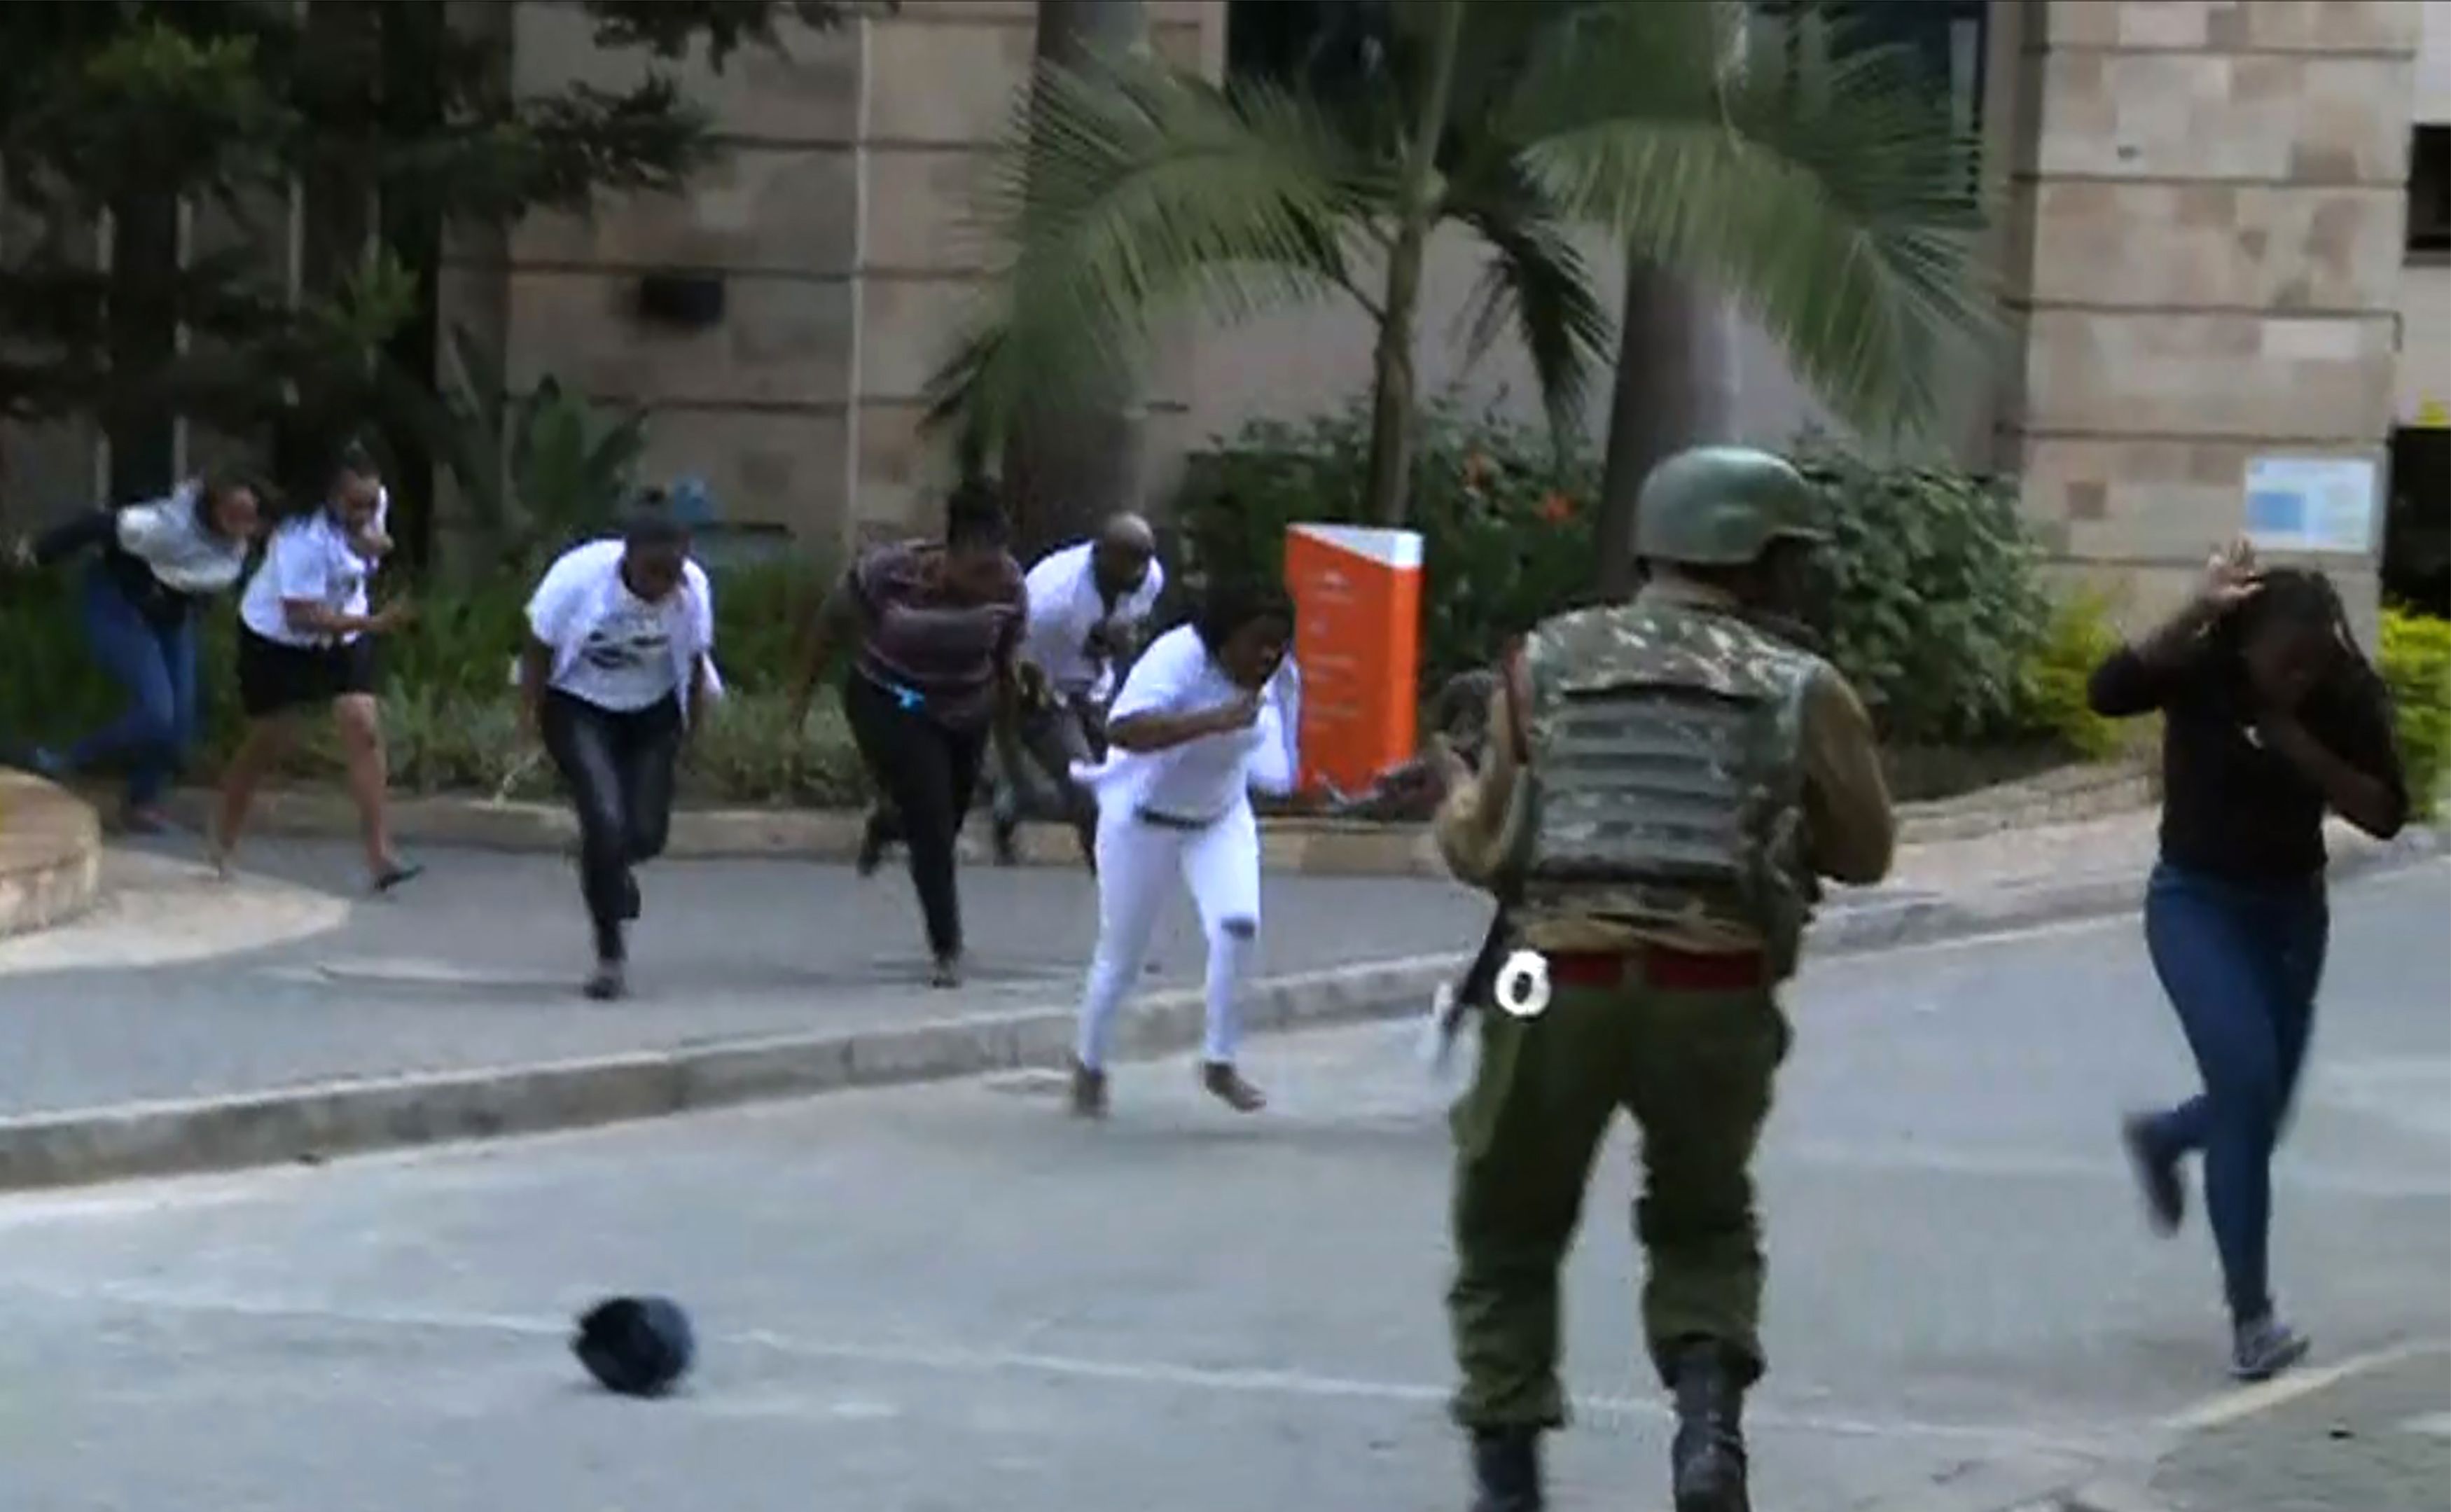 Image taken from an AFP TV footage shows people running in a street as a gunfight was underway following a blast at a hotel and office complex in a leafy Nairobi neighbourhood on January 15, 2019.